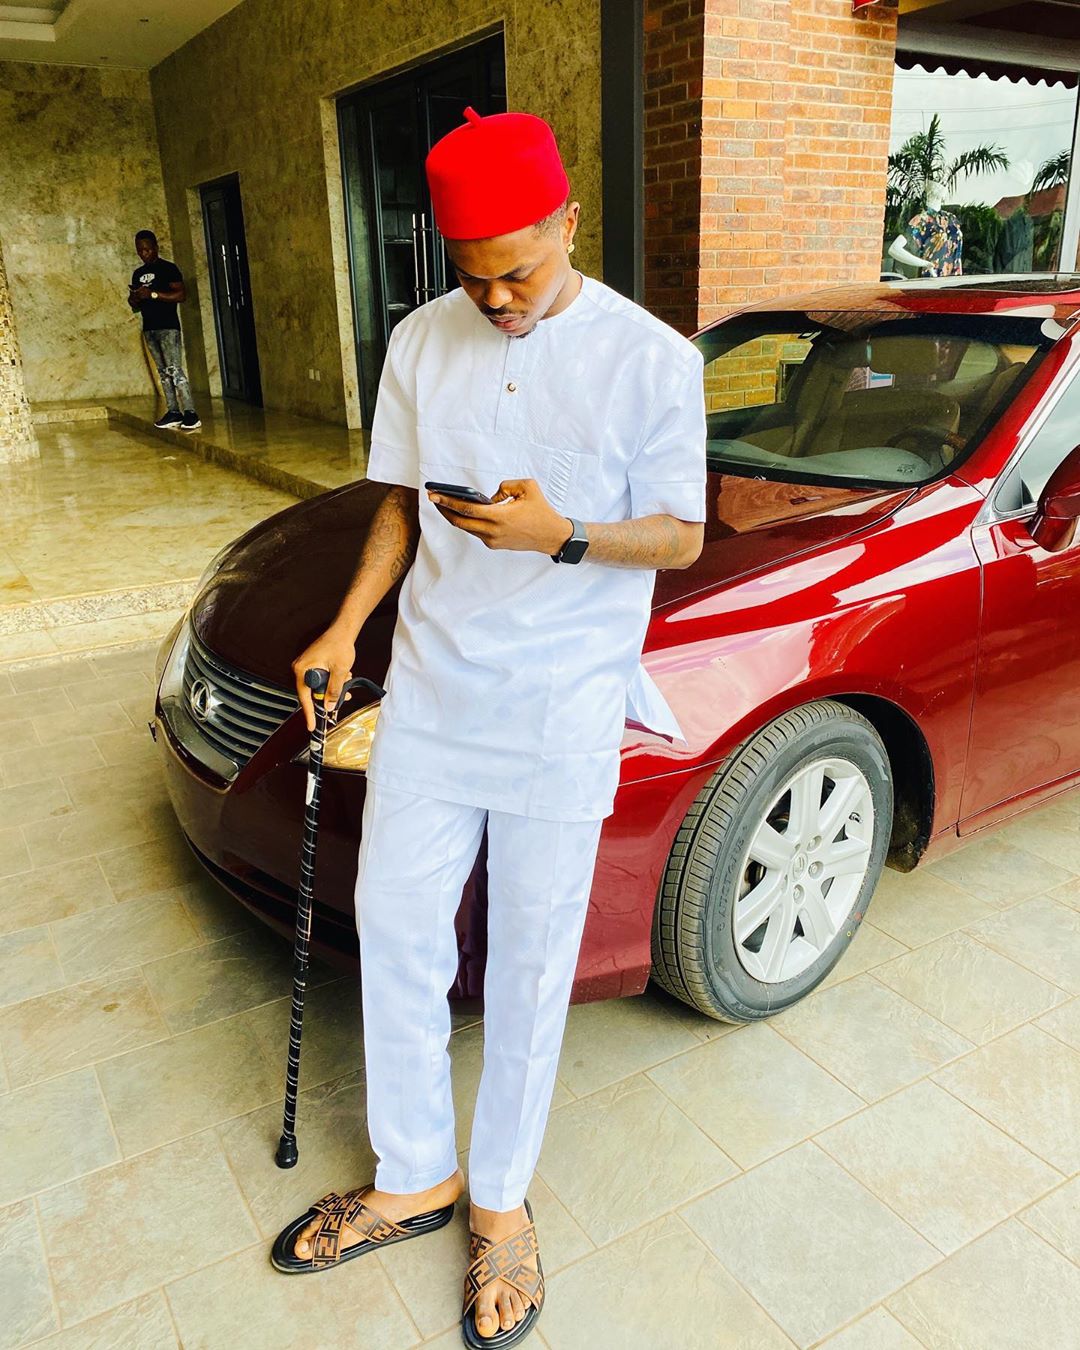 Days after his release, alleged Fraudster, Bitcoin Lord Shows off Newly Acquired Car (Photos)